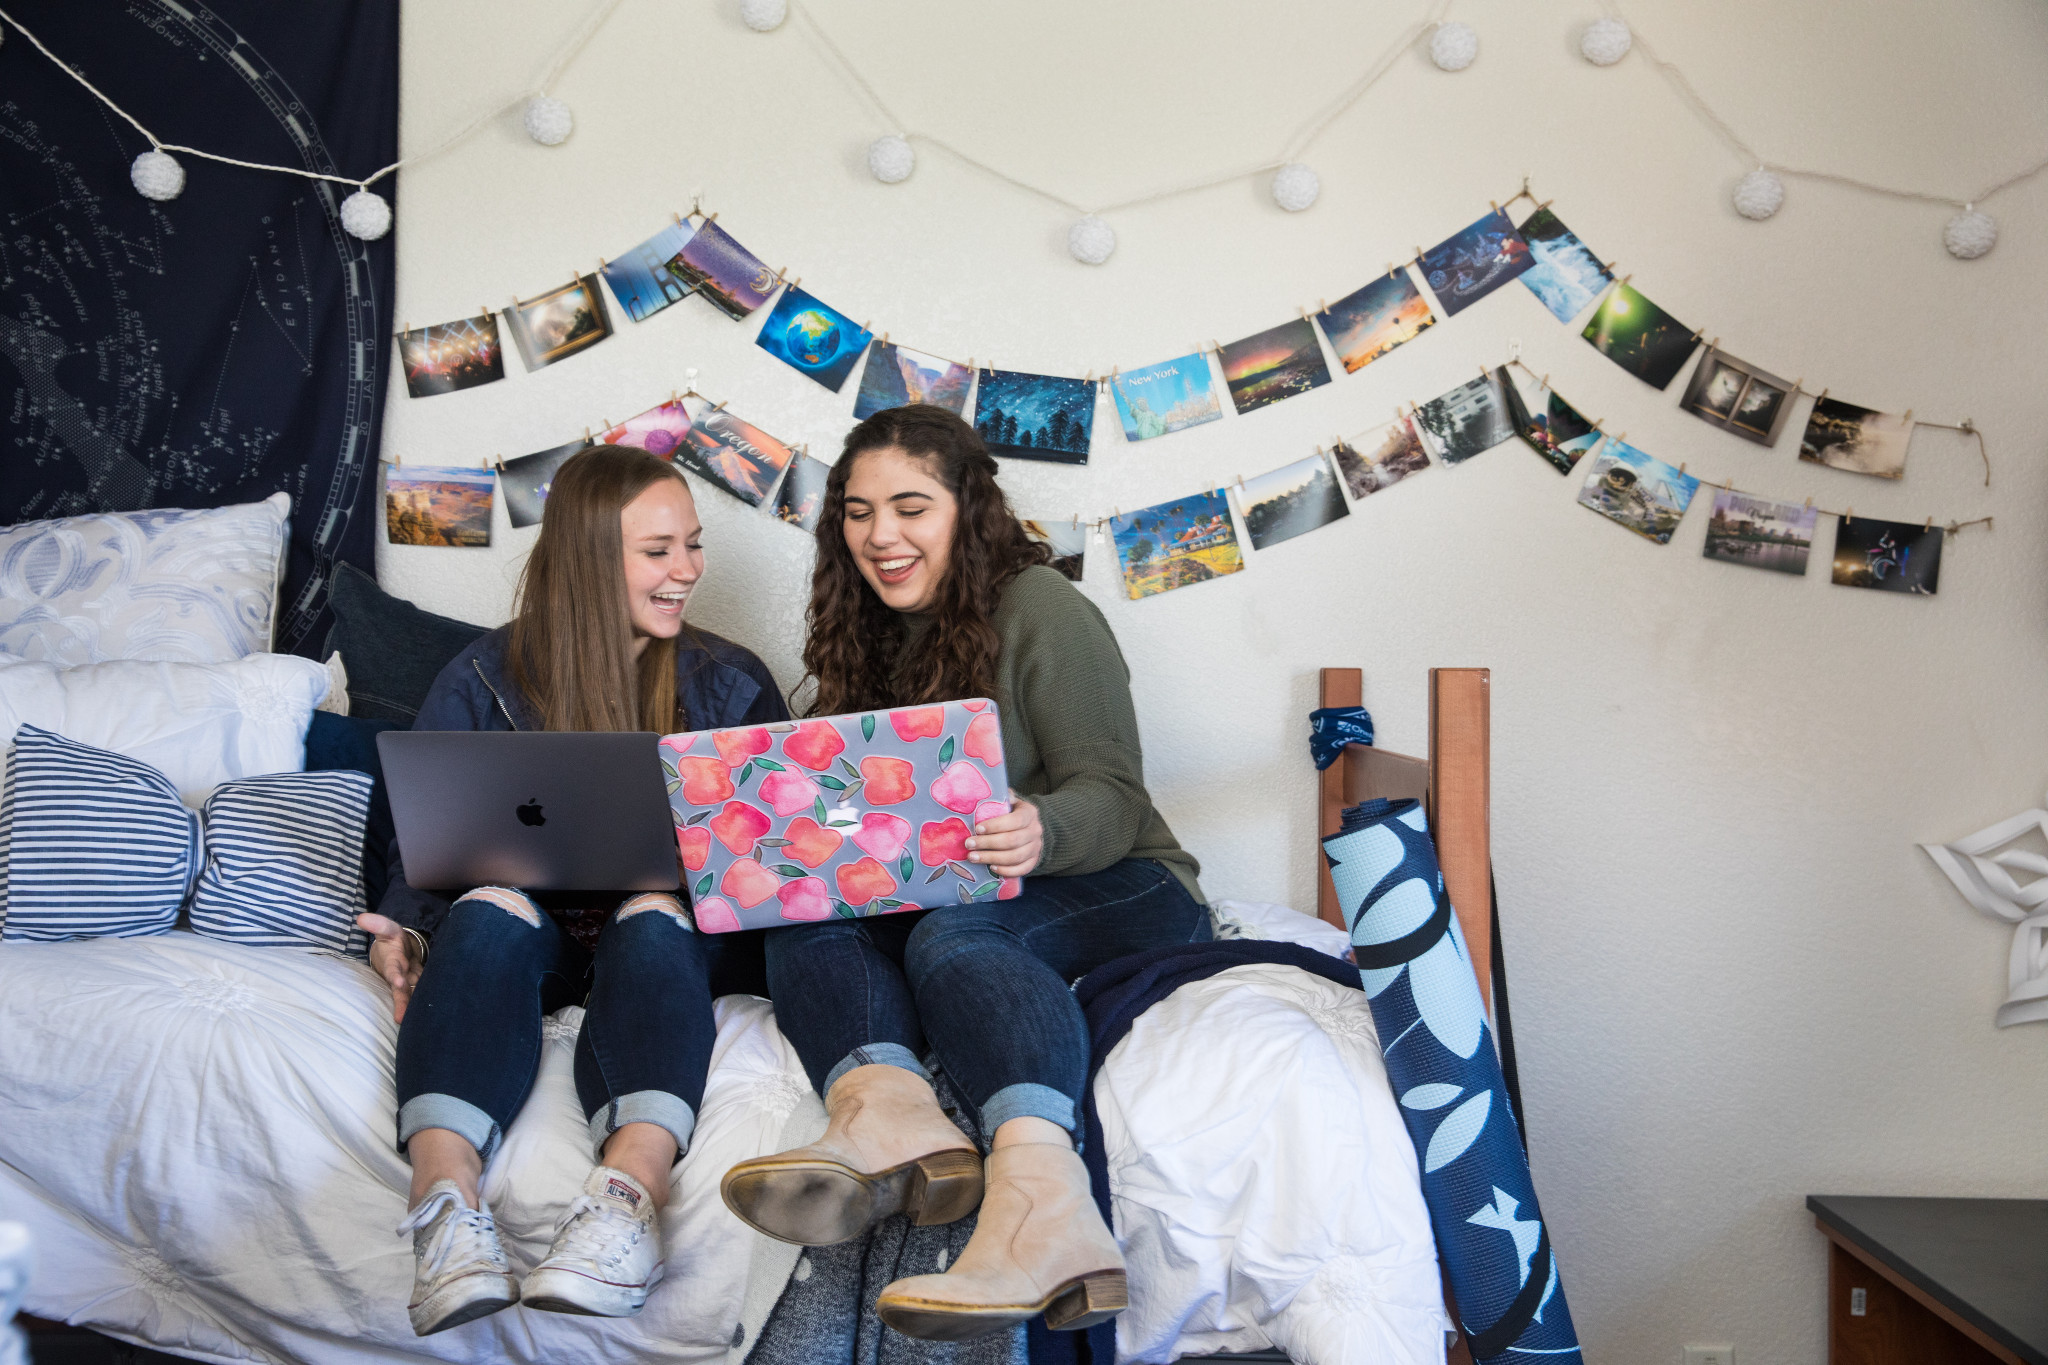 Students in dorm room laugh while studying on laptops.